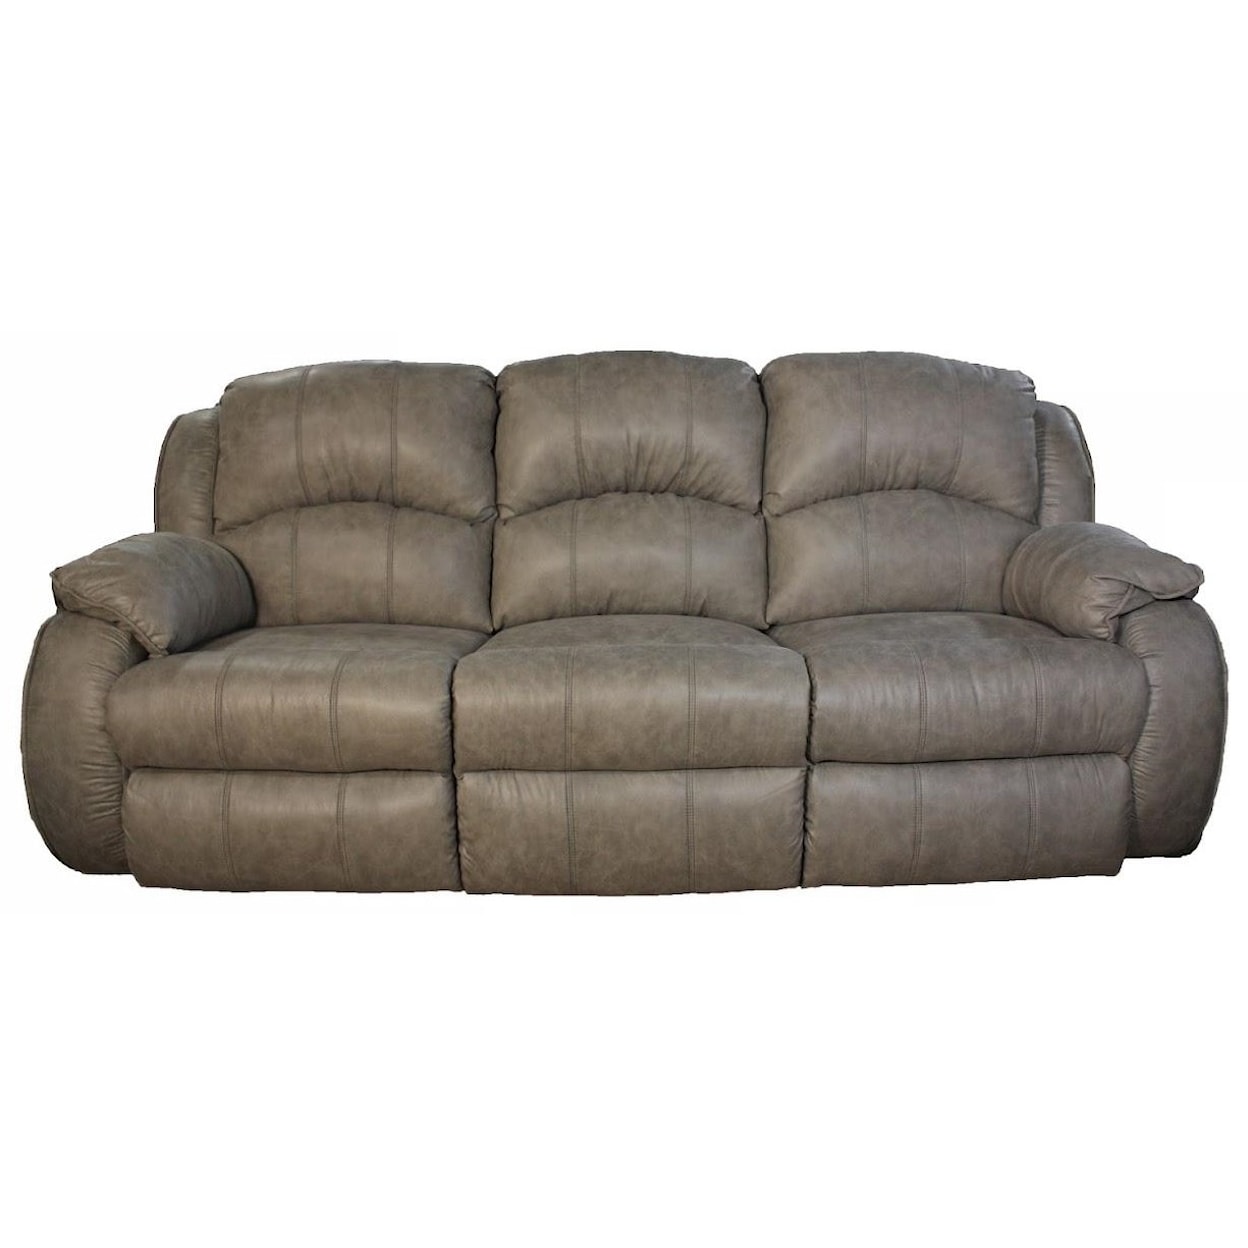 Southern Motion CAGNEY Reclining Sofa